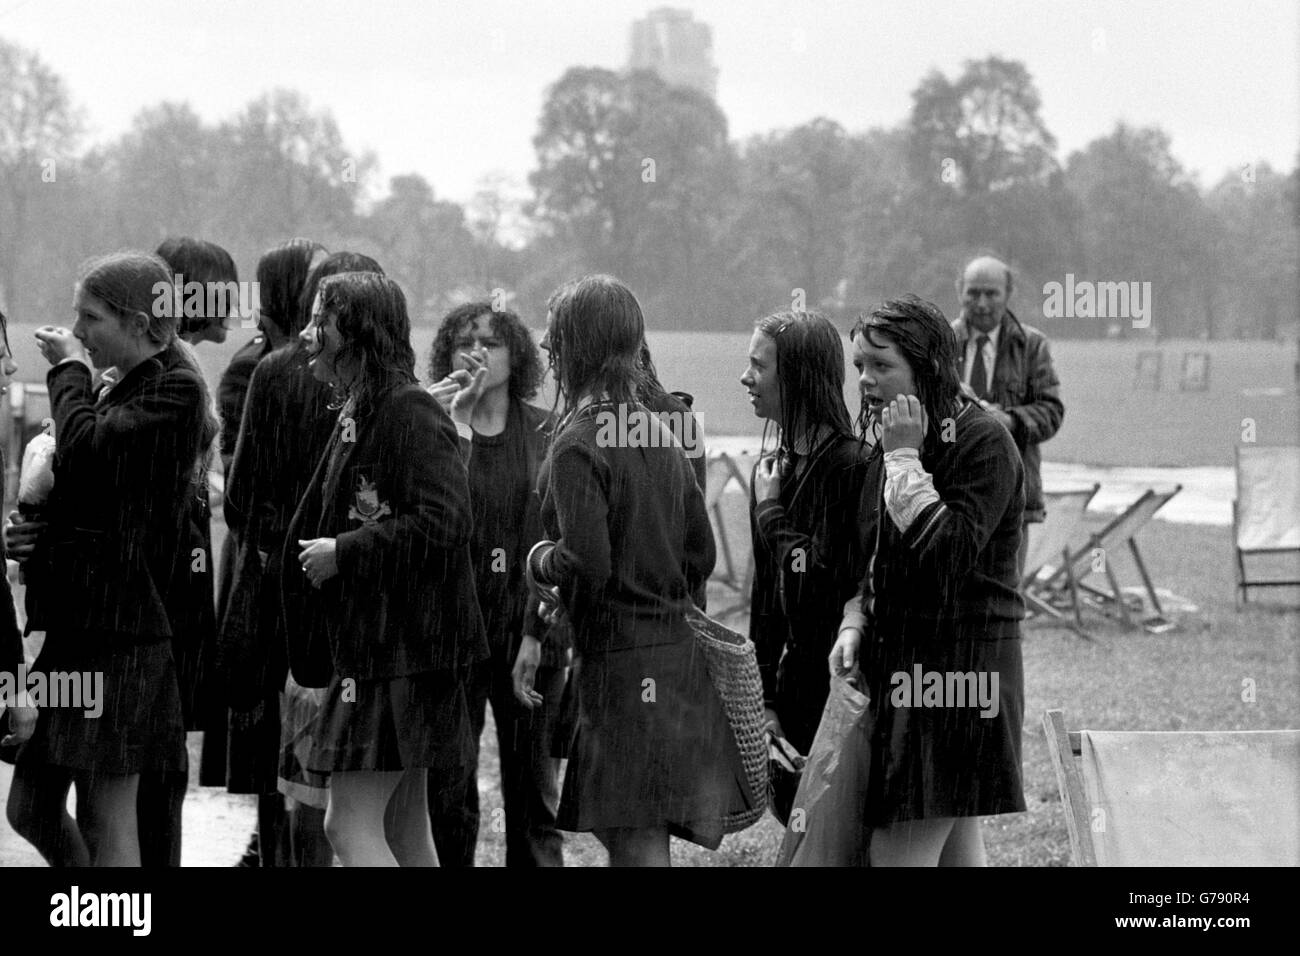 A group of schoolchildren head for shelter after a heavy downpour dampens their 'pupil power' demonstration at Speaker's Corner in Hyde Park. Children are protesting against caning, detention, uniforms and headmaster dictatorship. Stock Photo